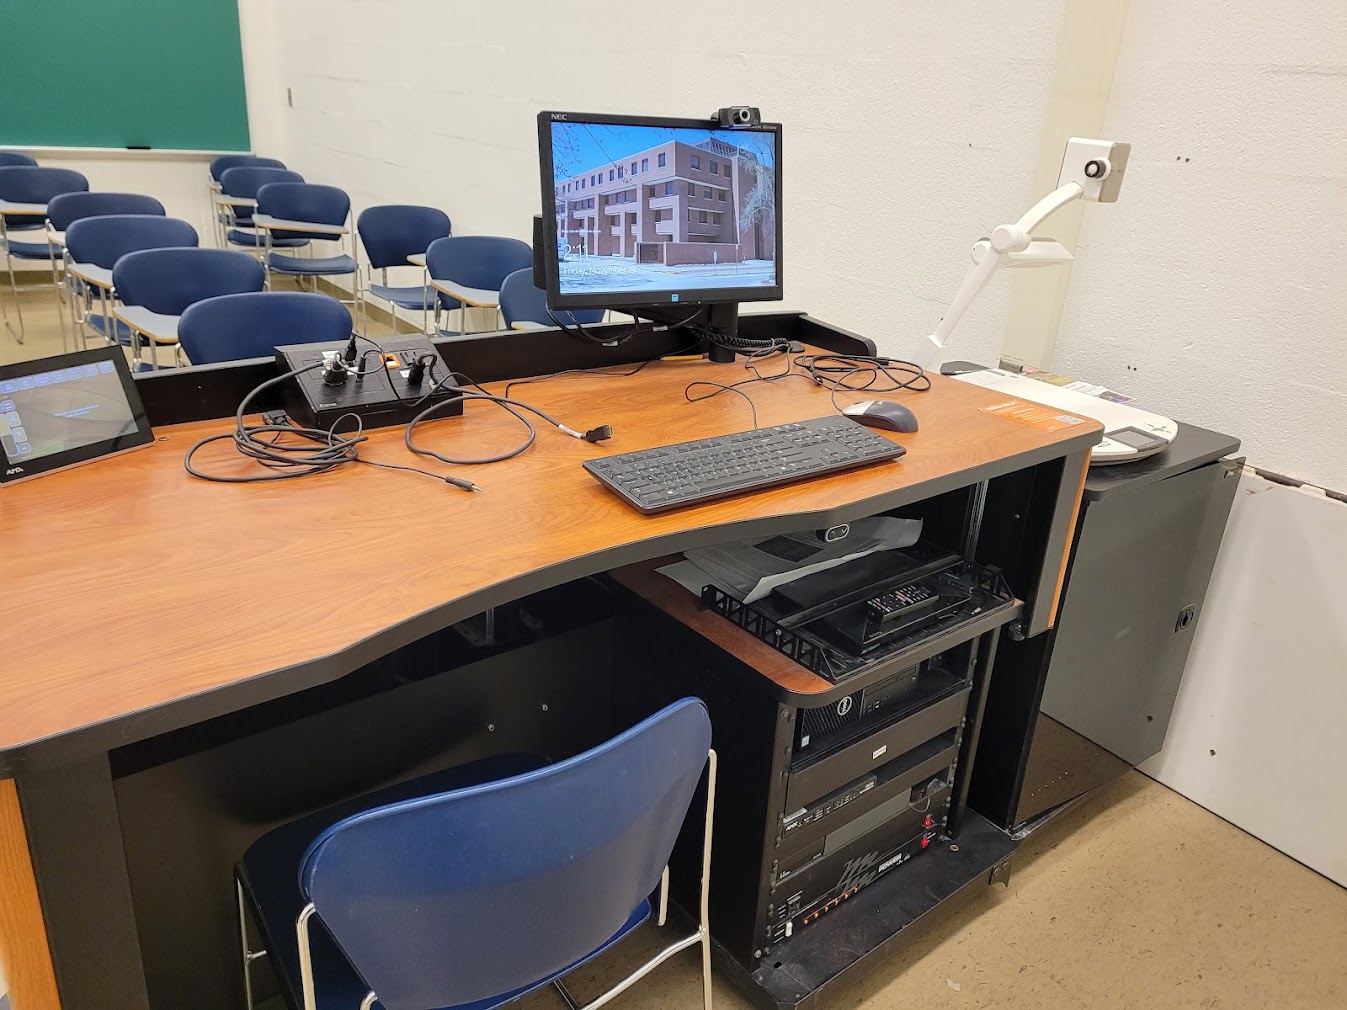 A view of the open cabinet with a computer monitor, VGA and HDMI inputs, a touch panel controller, document camera, and audio visual rack.